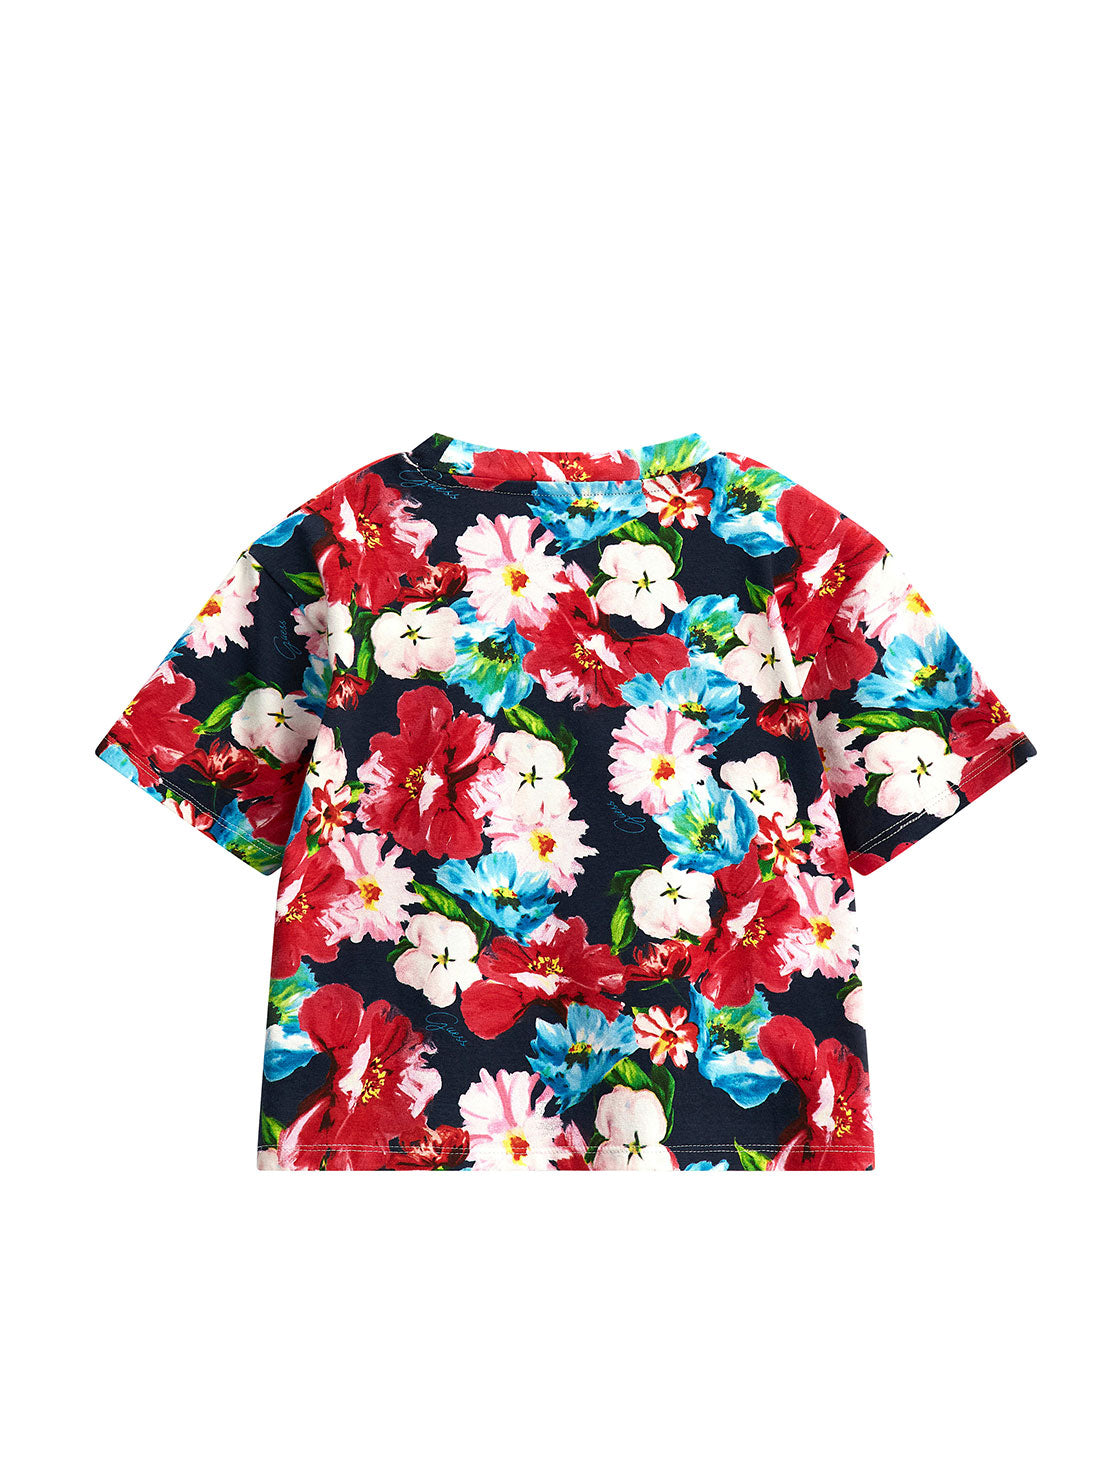 GUESS Floral Short Sleeve T-Shirt (2-7) back view